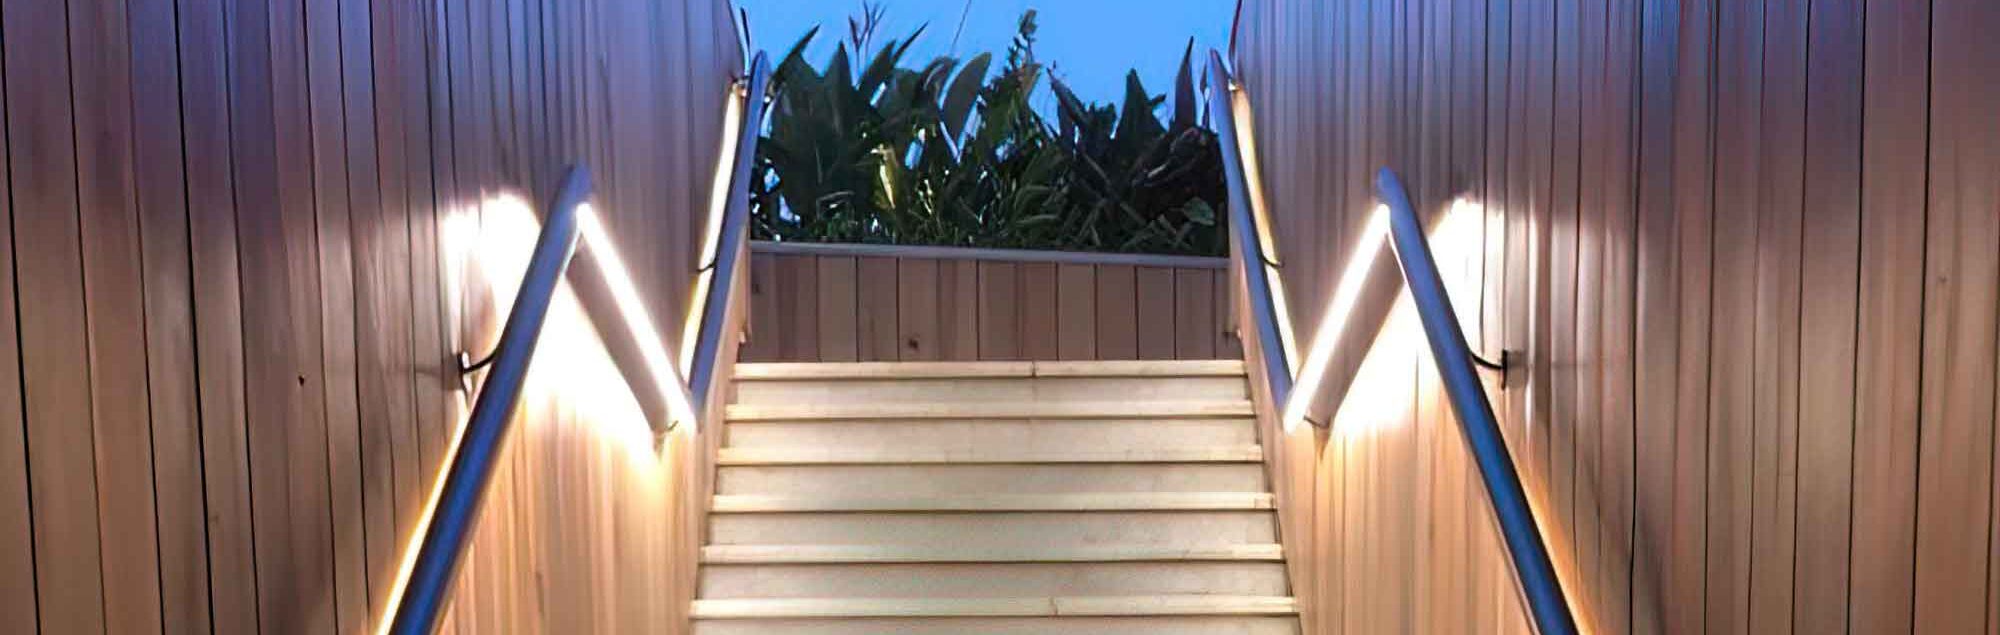 stairway-built-with-custom-export-canadian-wood